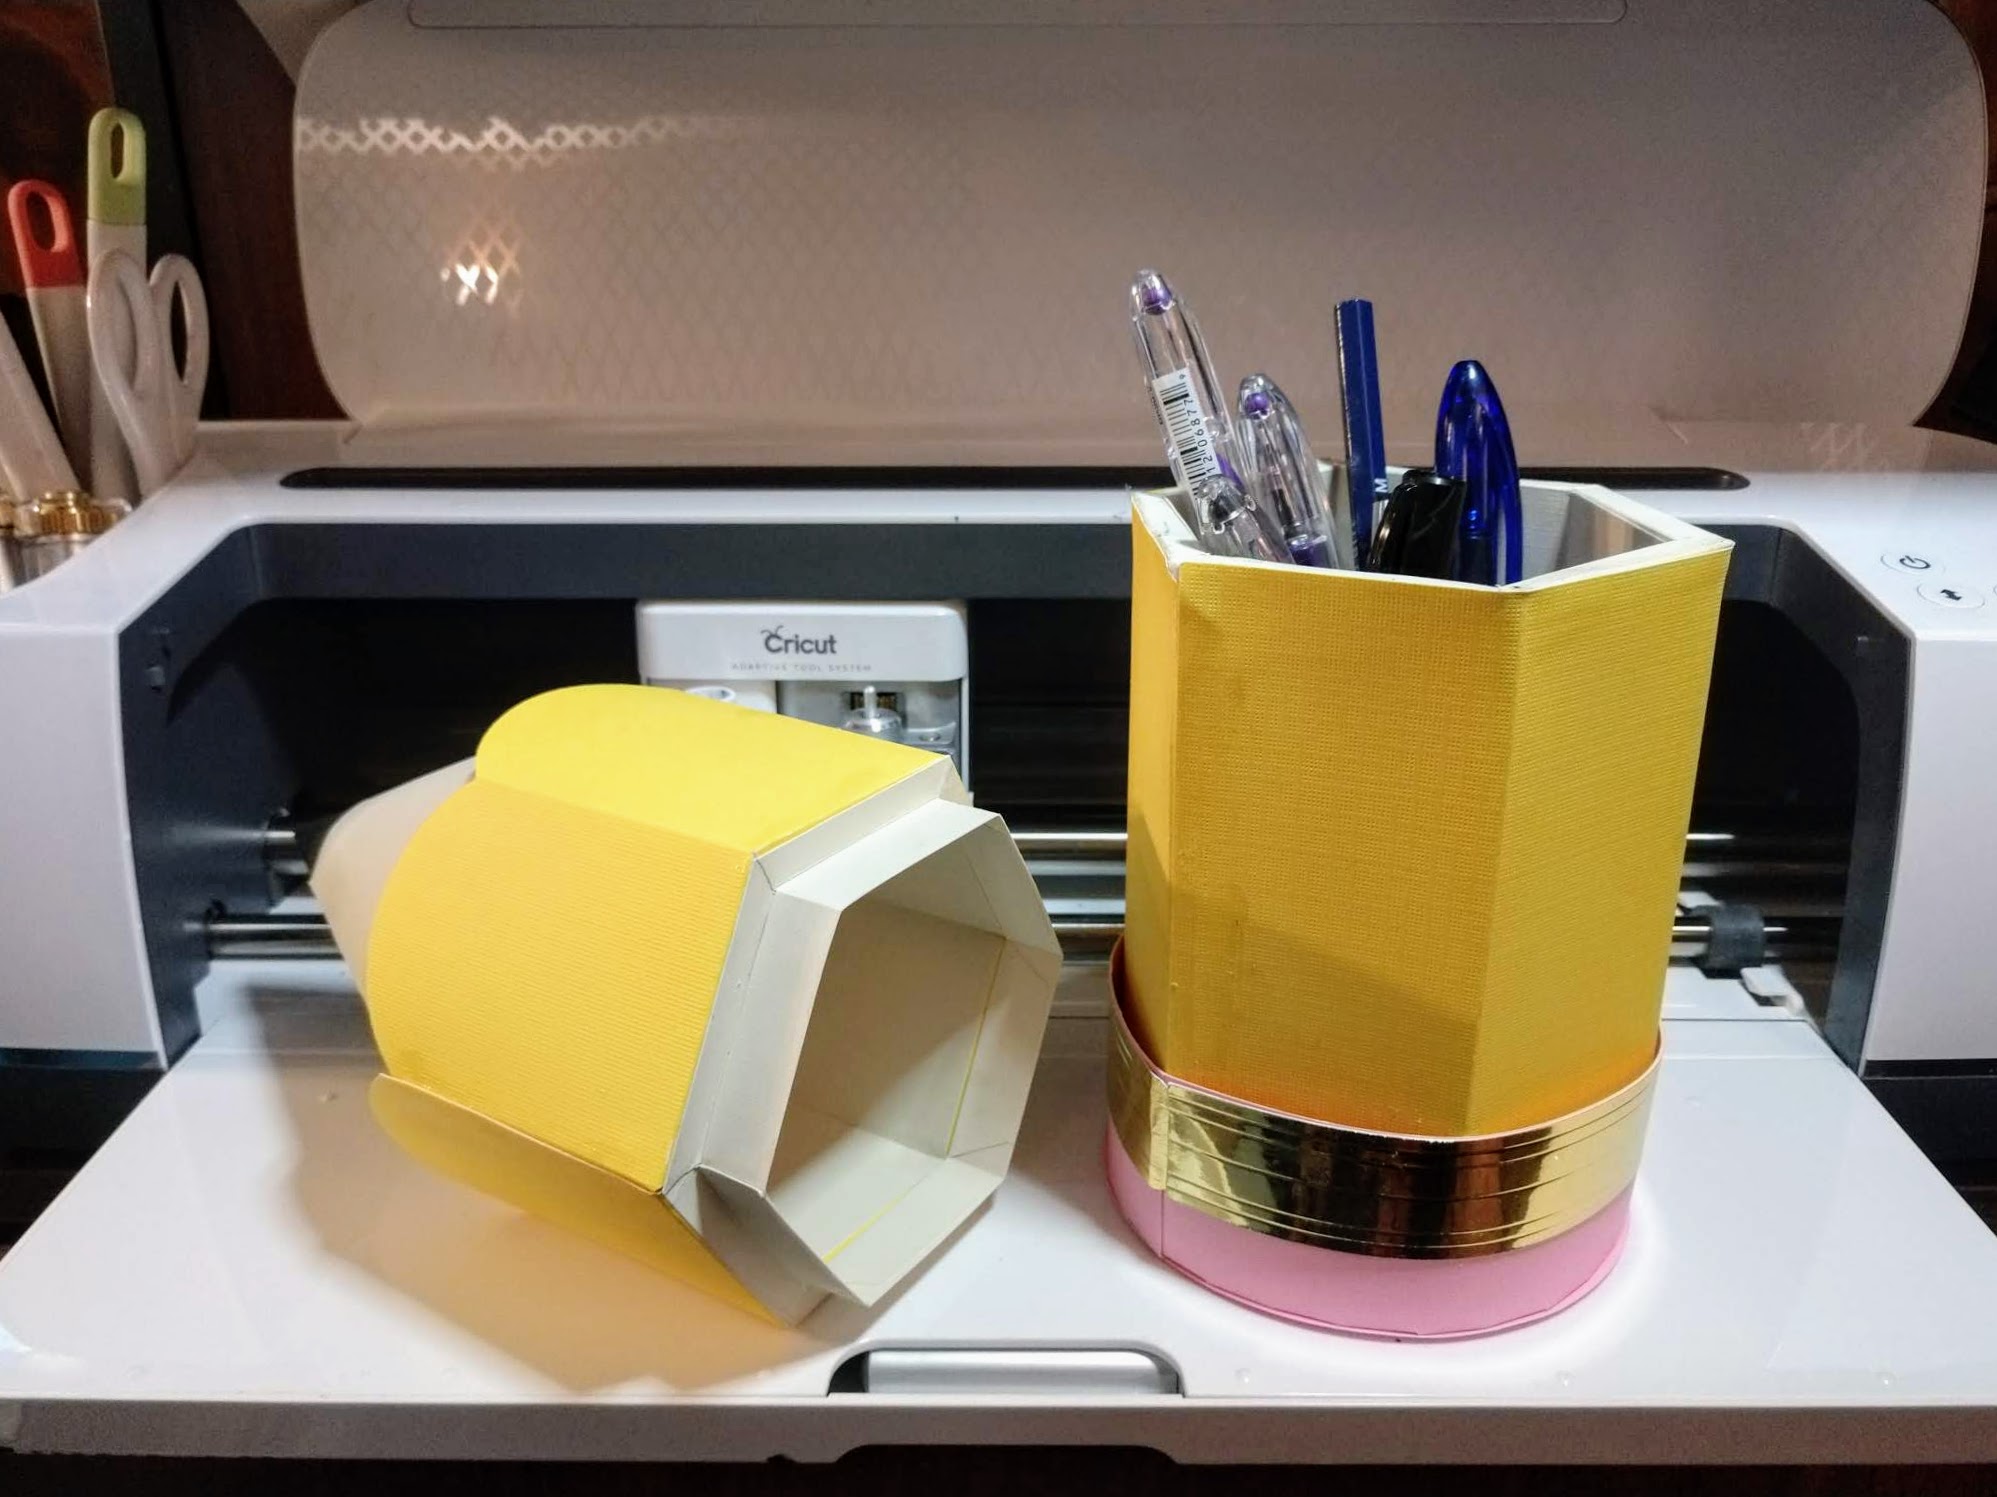 Pencil box open with pens inside